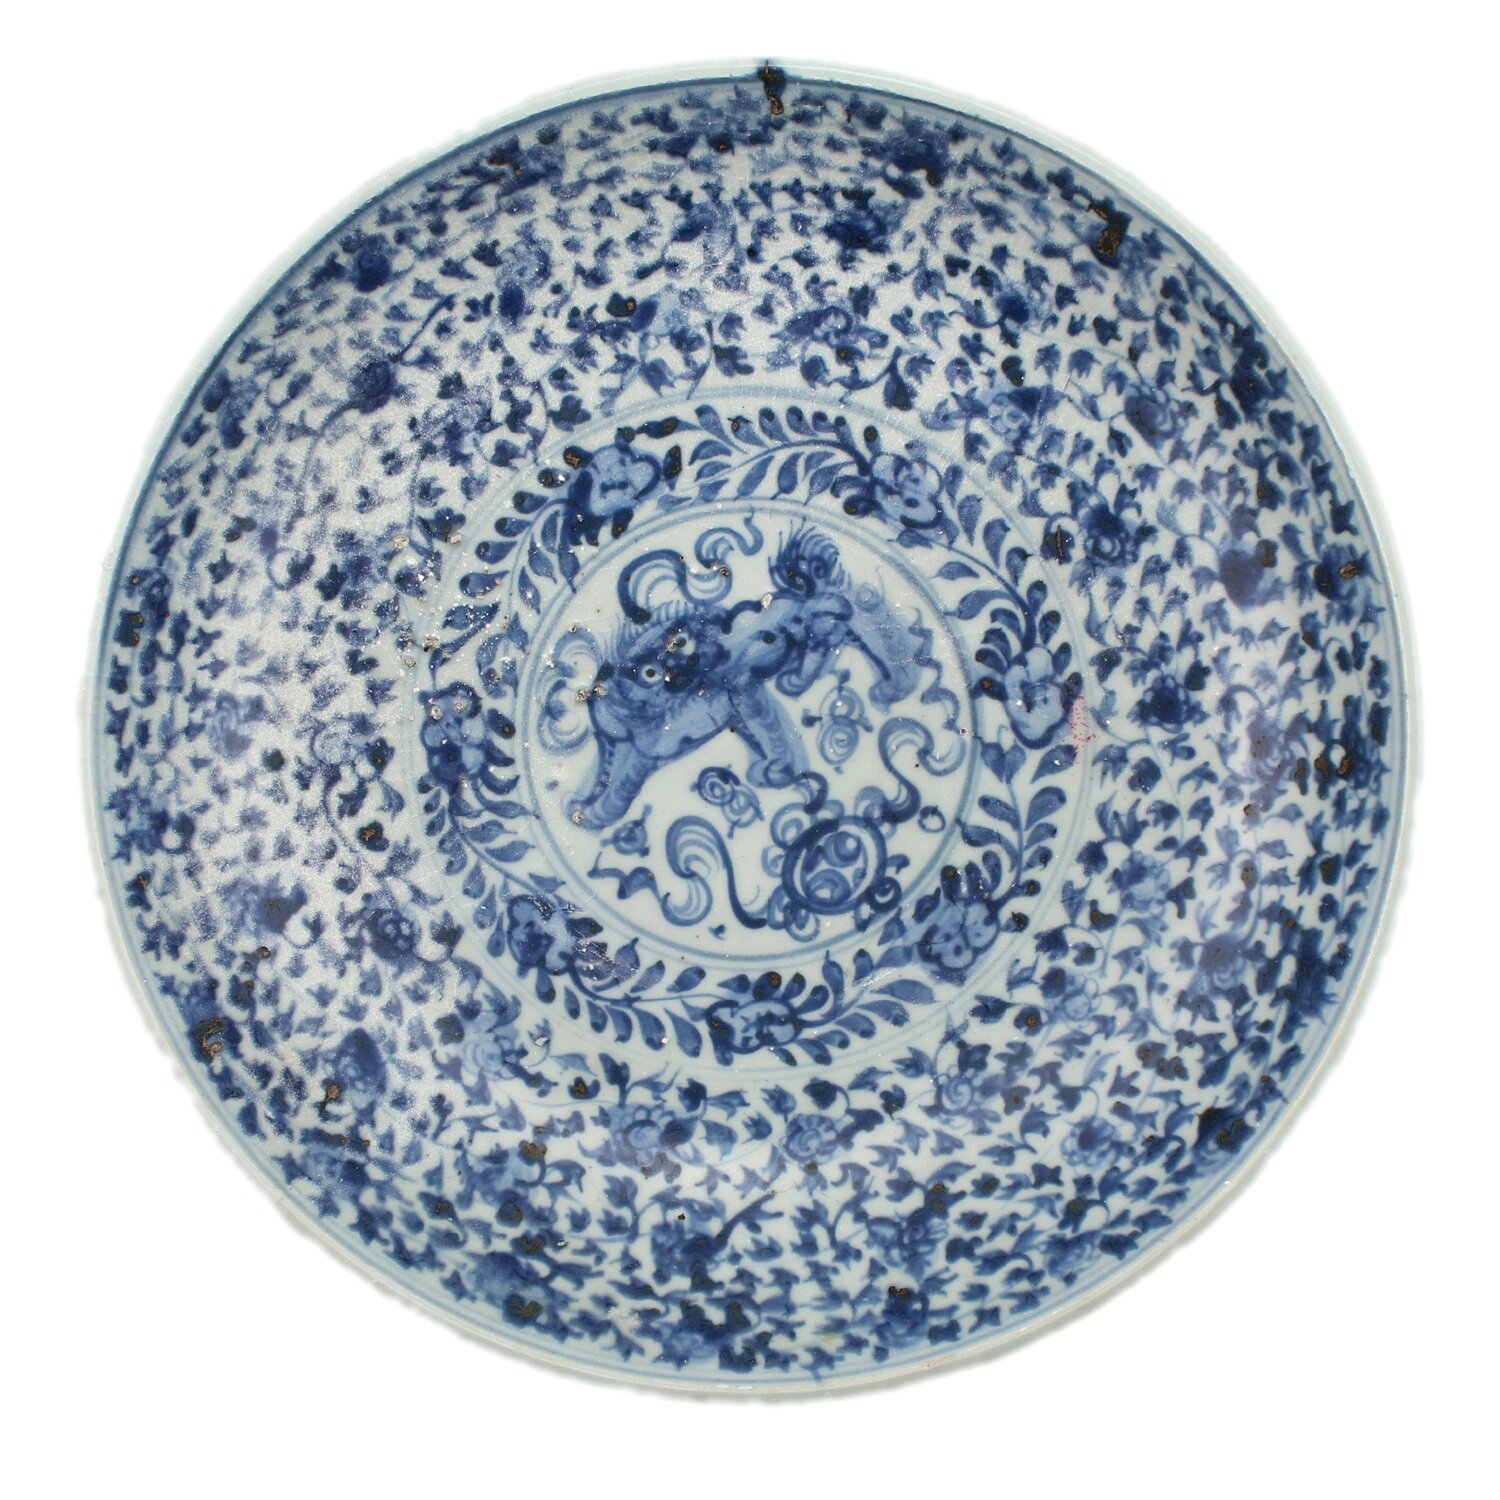 Ming Chinese Export Charger, 17th Century